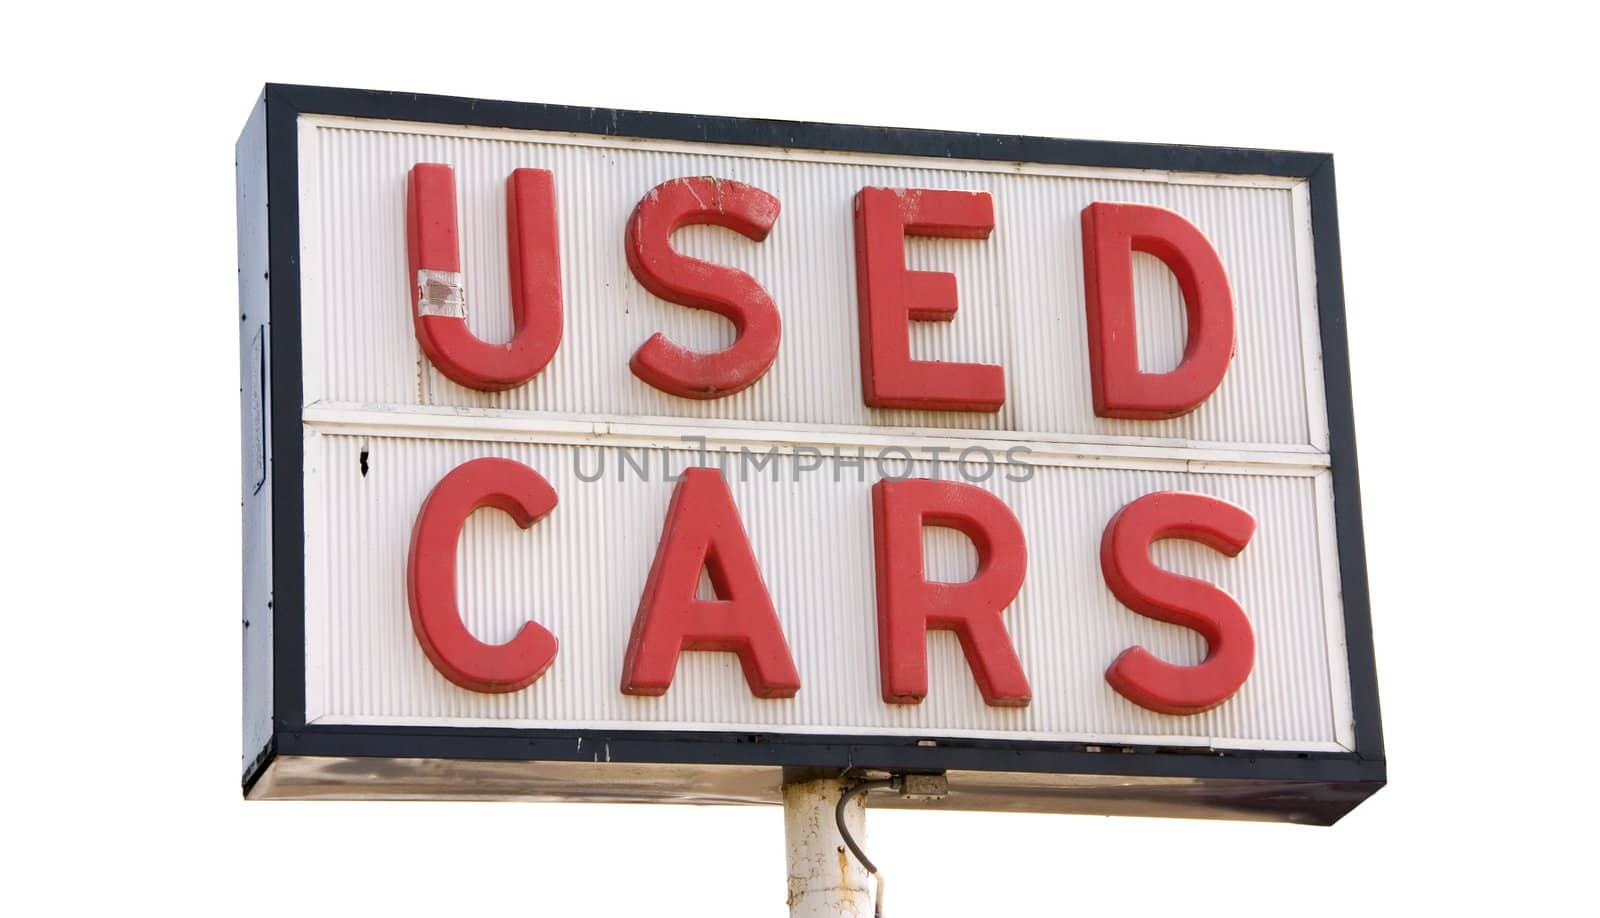 Used Cars by dtouch1